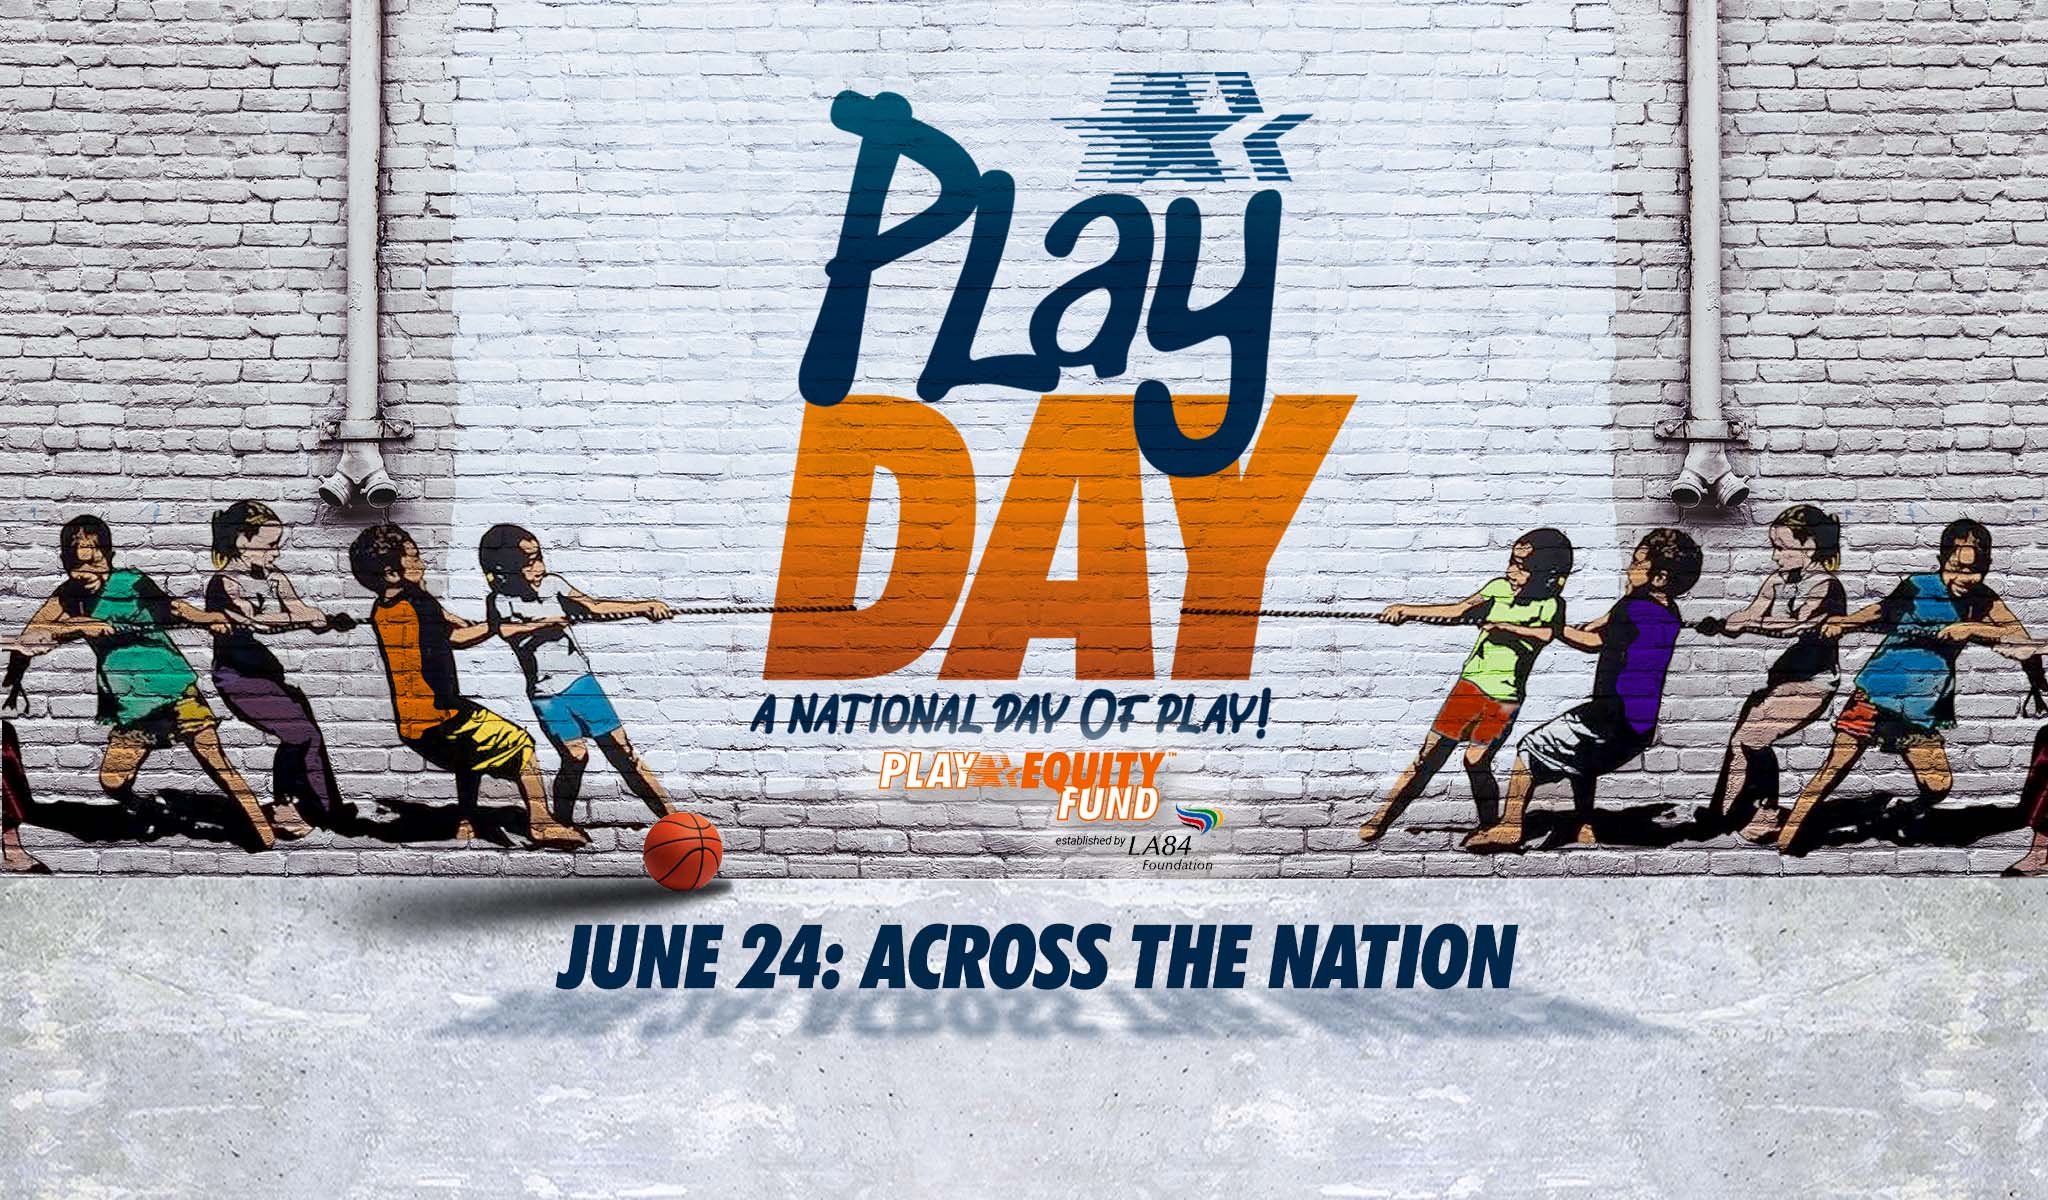 The LA84 Foundation is committed to closing the Play Equity gap.